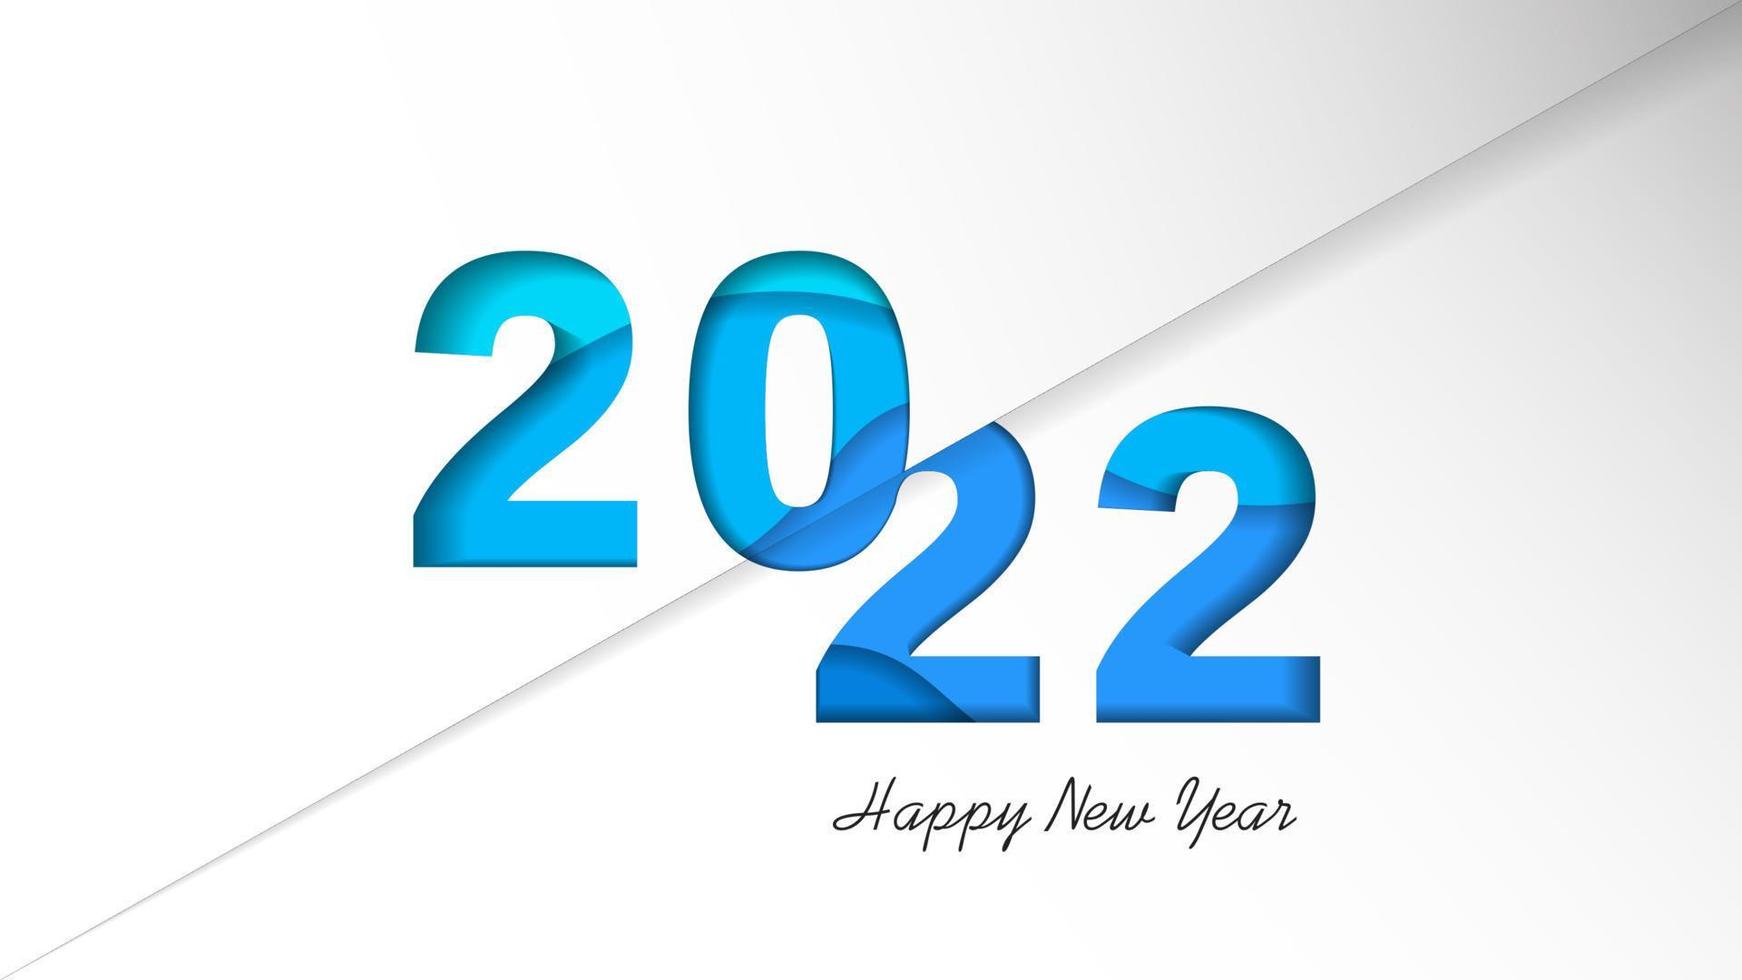 Happy New Year 2022 Background Template. Holiday Vector Illustration of Blue Paper Cut Numbers 2022. 2022 Paper Cut Background Festive Poster or Banner Design